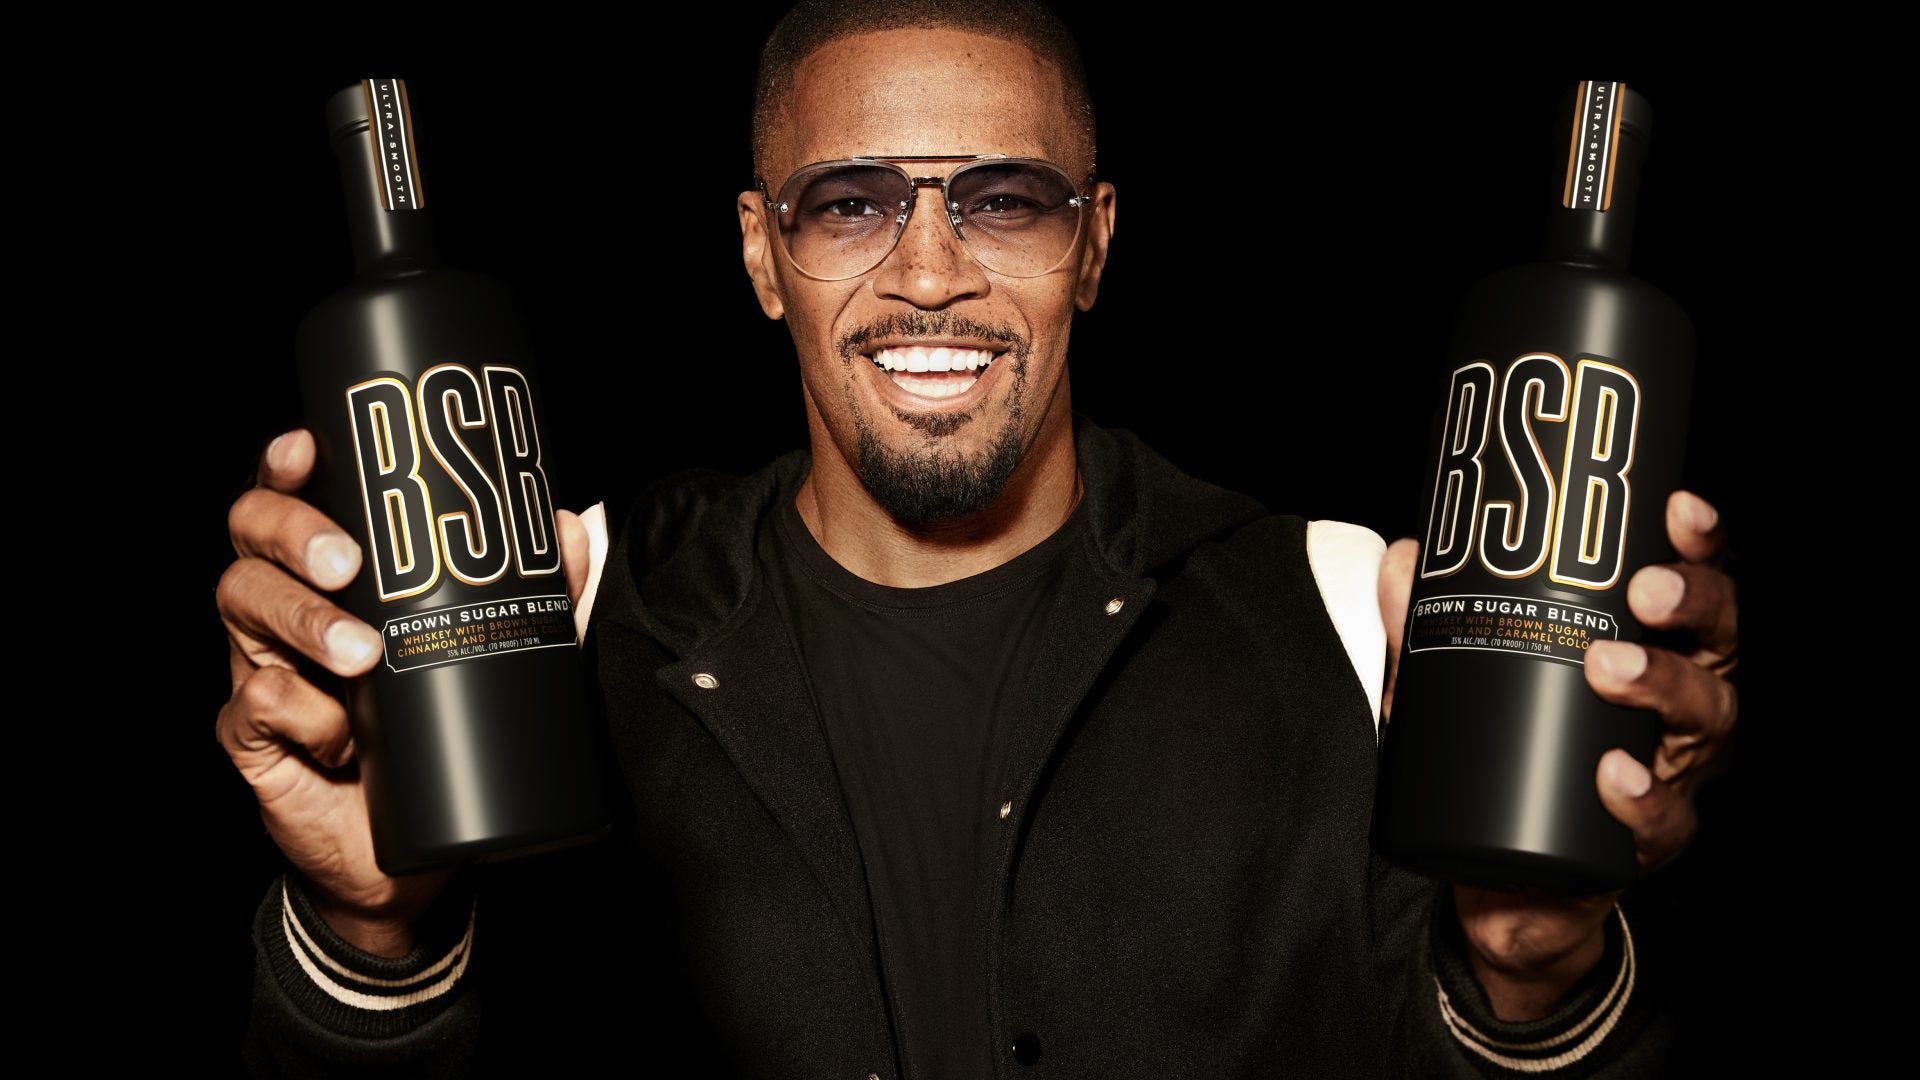 Let's Toast: Jamie Foxx Is Bringing New Flavor To 'BSB' Whiskey